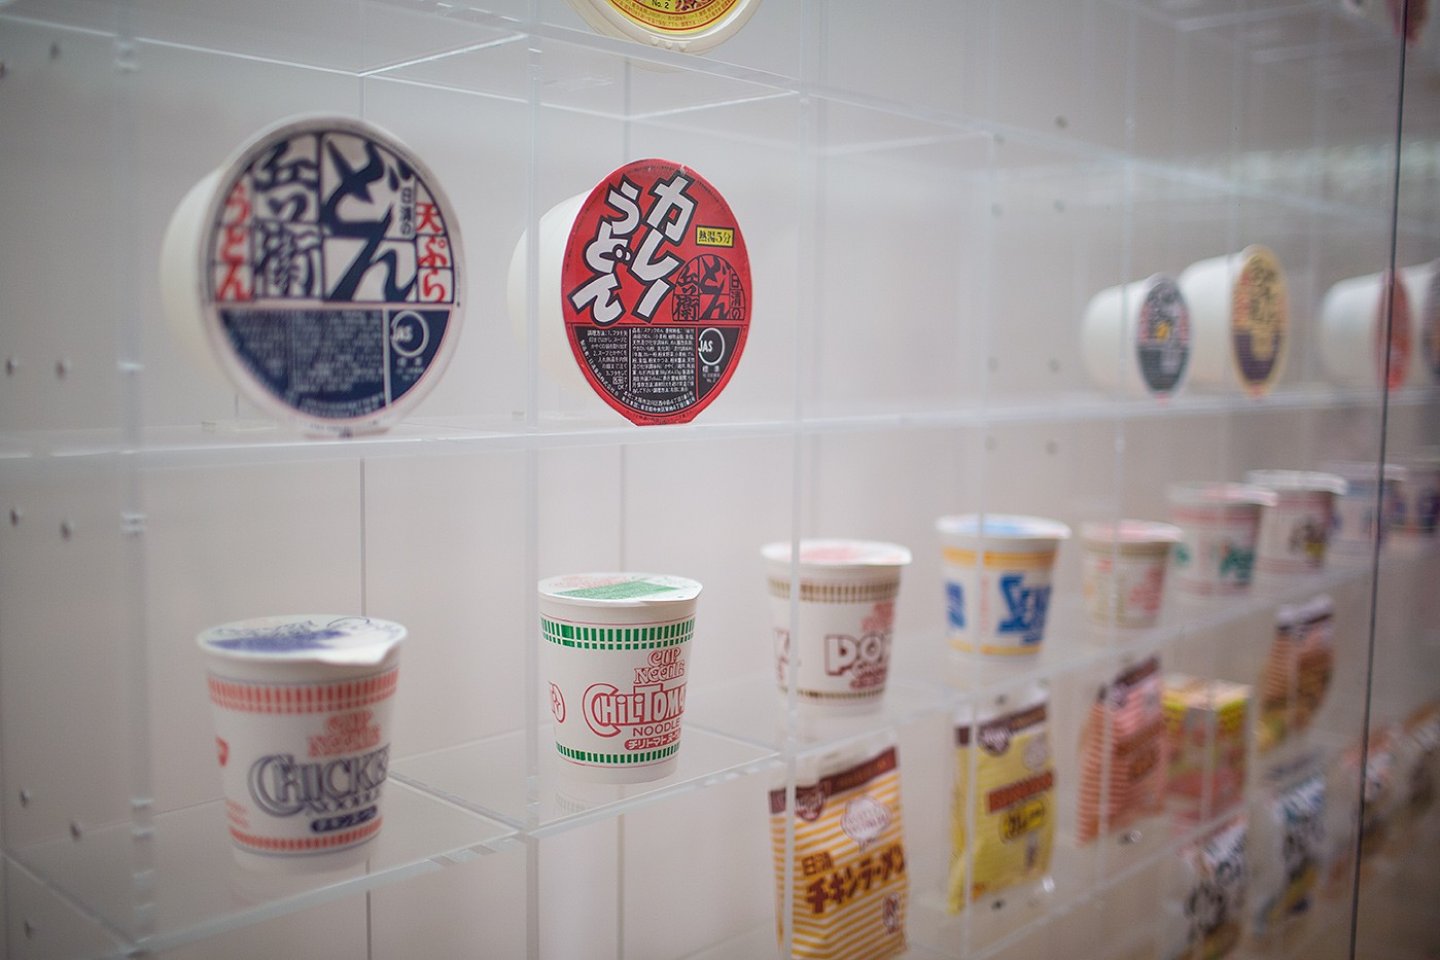 Just some of the many instant noodles on display at Yokohama's Cup Noodles Museum